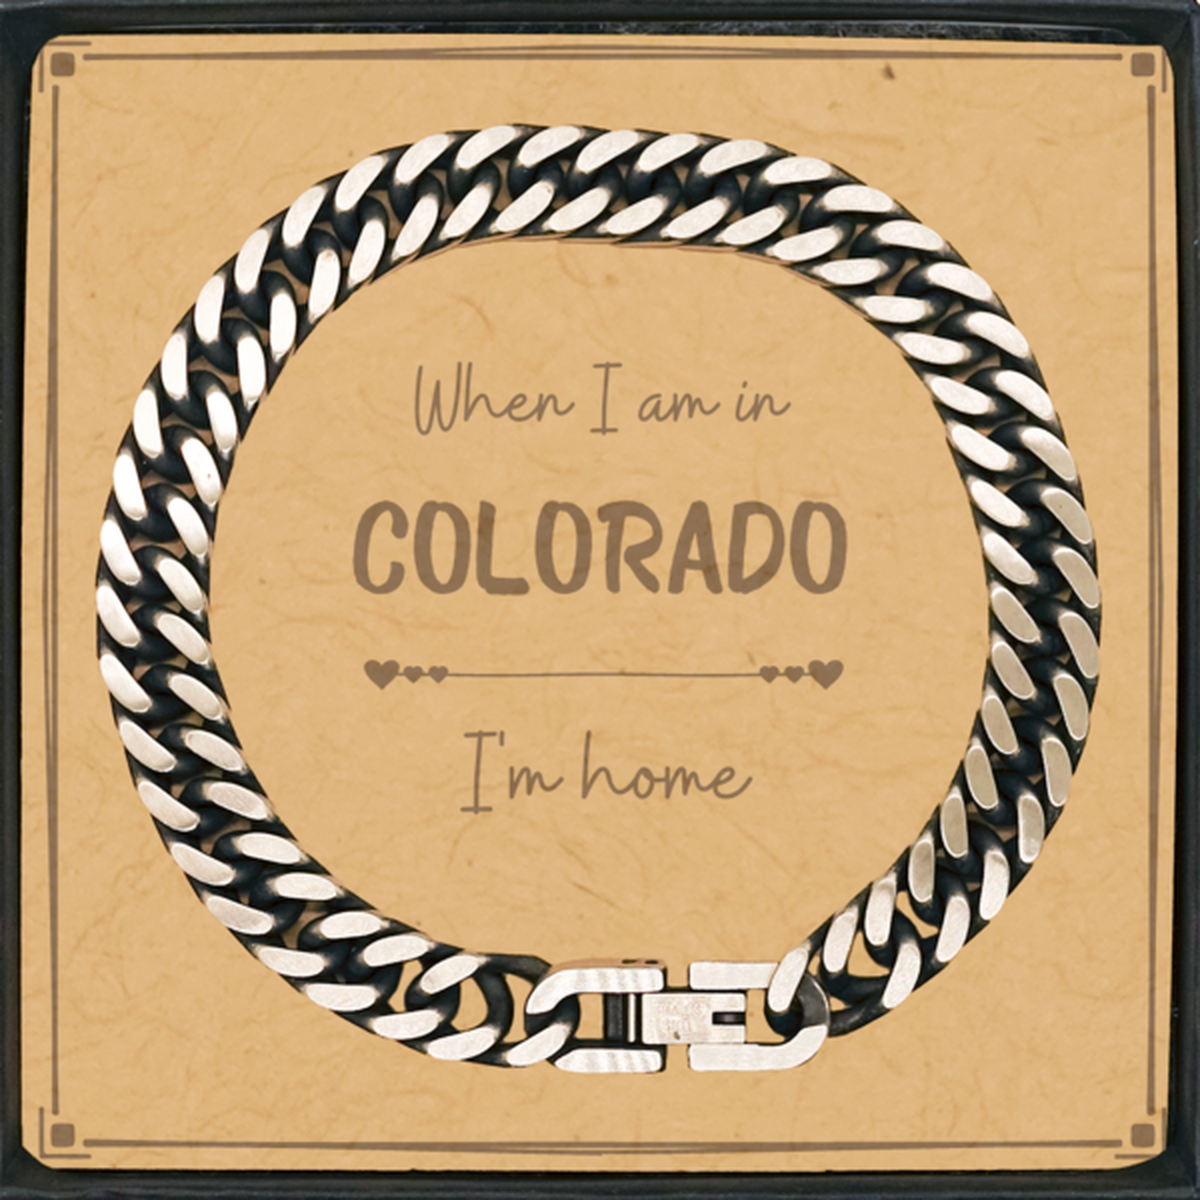 When I am in Colorado I'm home Cuban Link Chain Bracelet, Message Card Gifts For Colorado, State Colorado Birthday Gifts for Friends Coworker